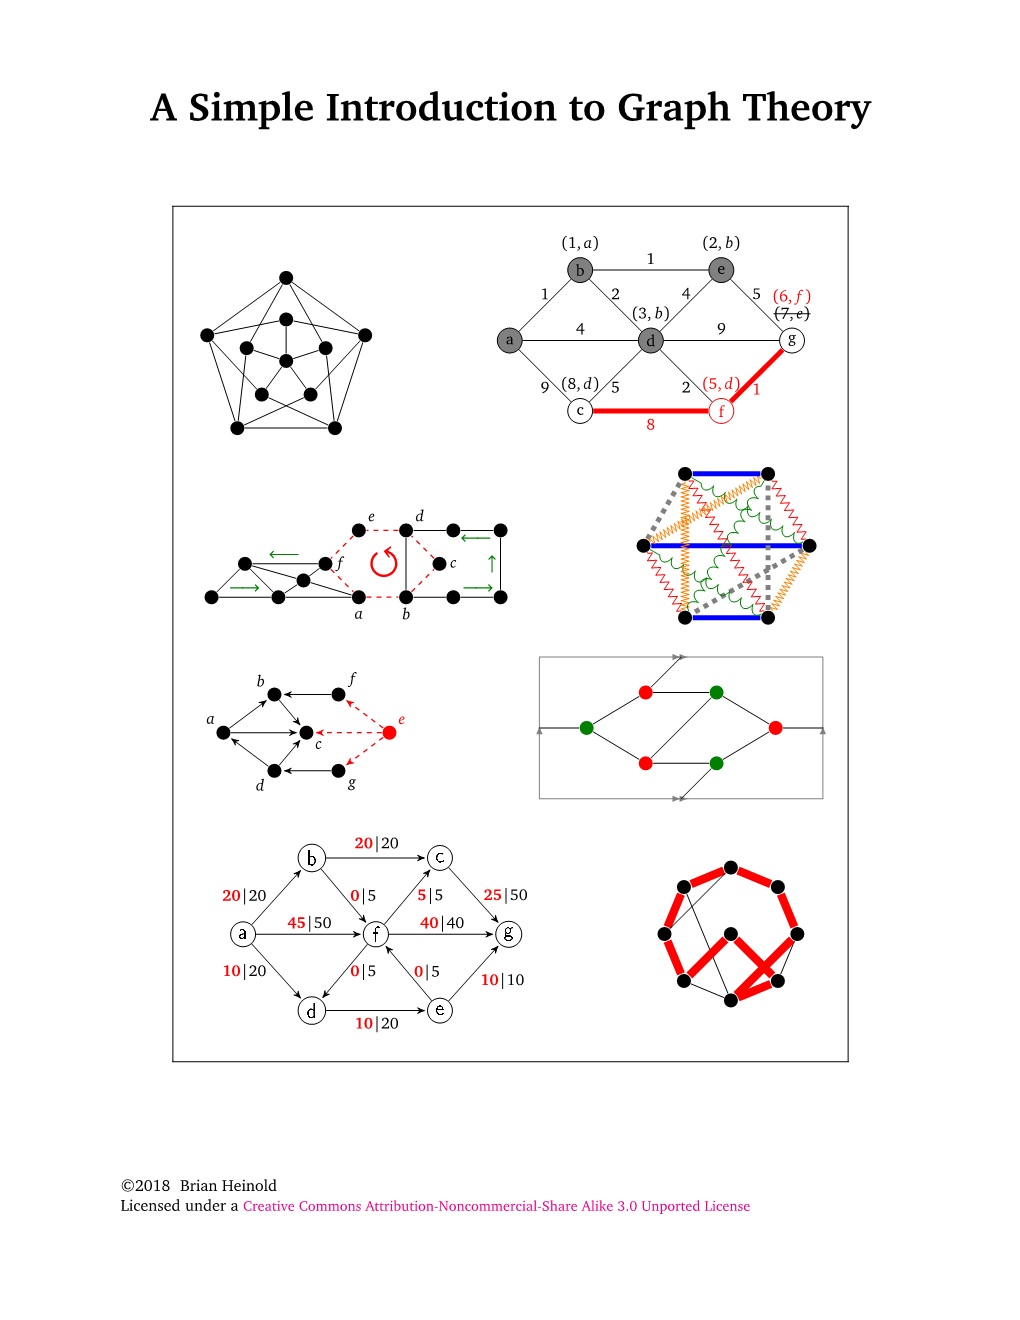 A Simple Introduction to Graph Theory